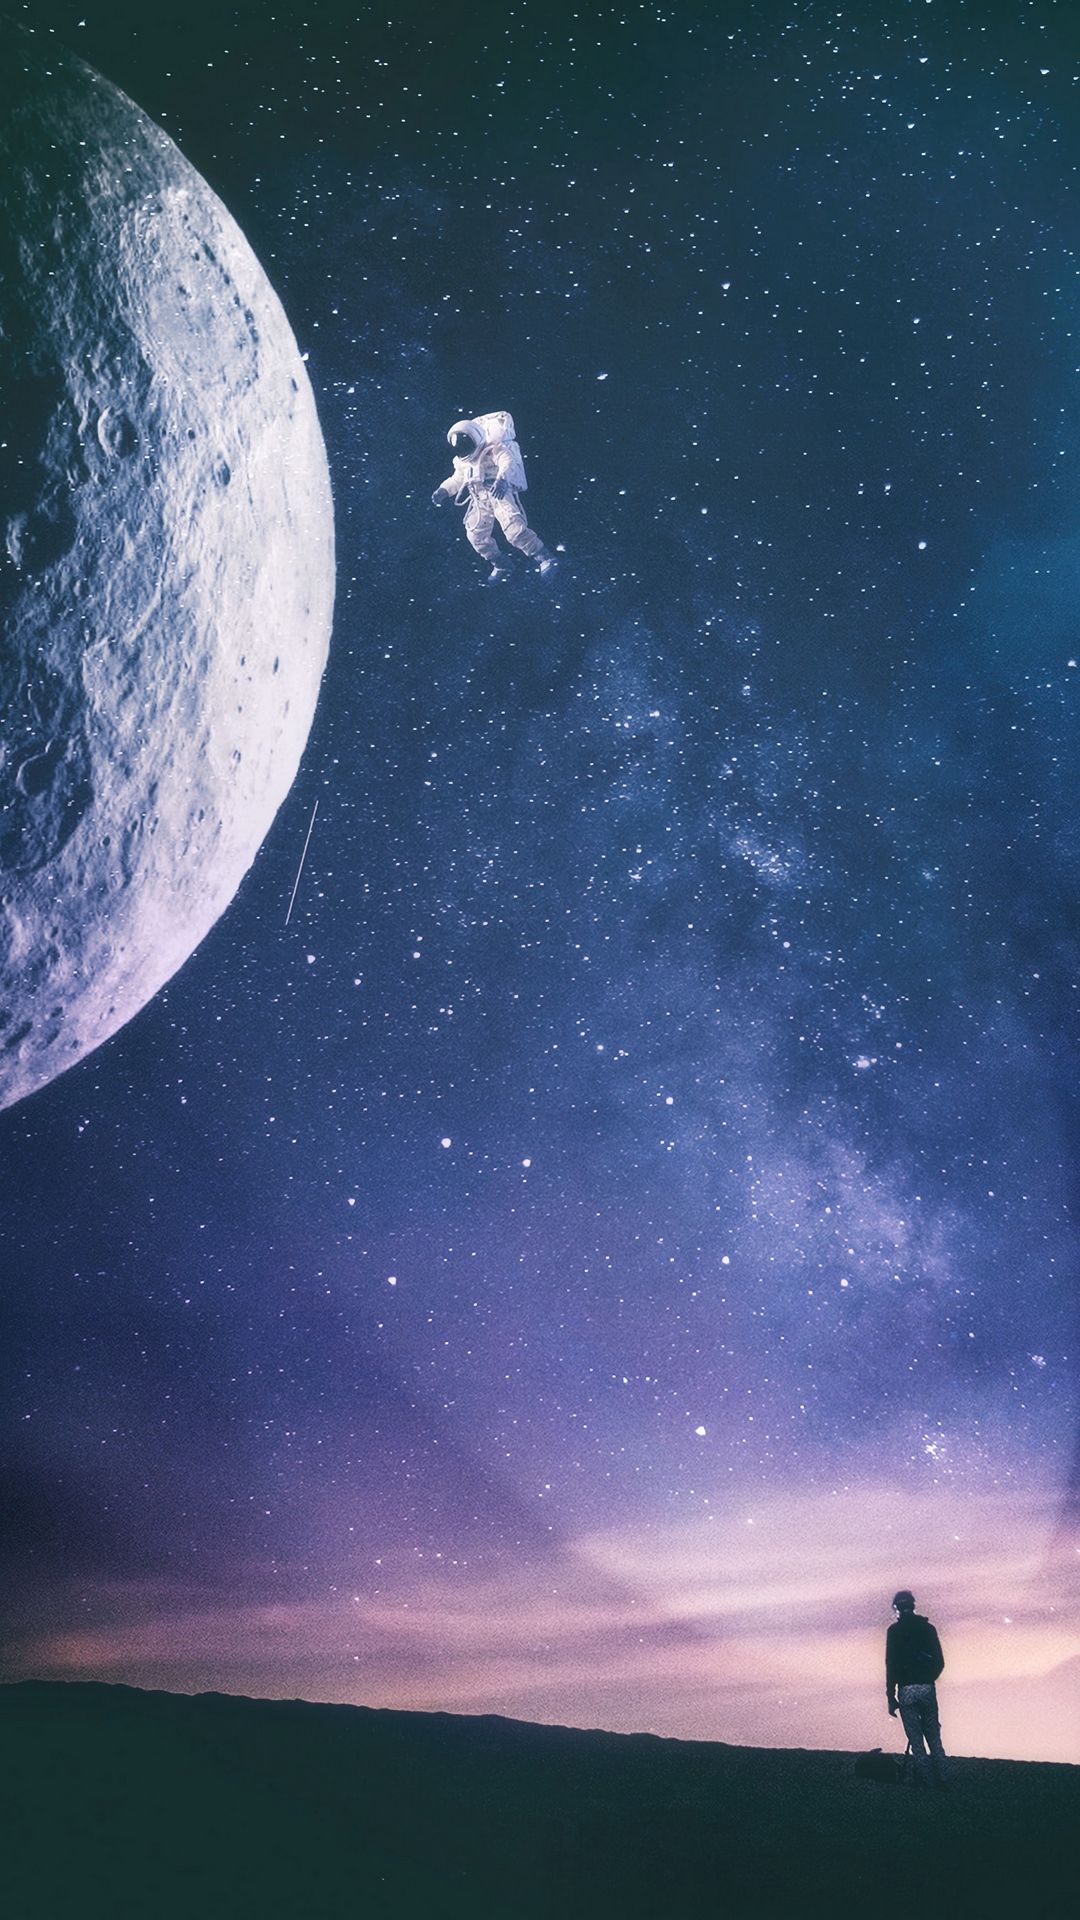 New HD Astronaut Space Phone Wallpapers On Home Screen In Kecbio